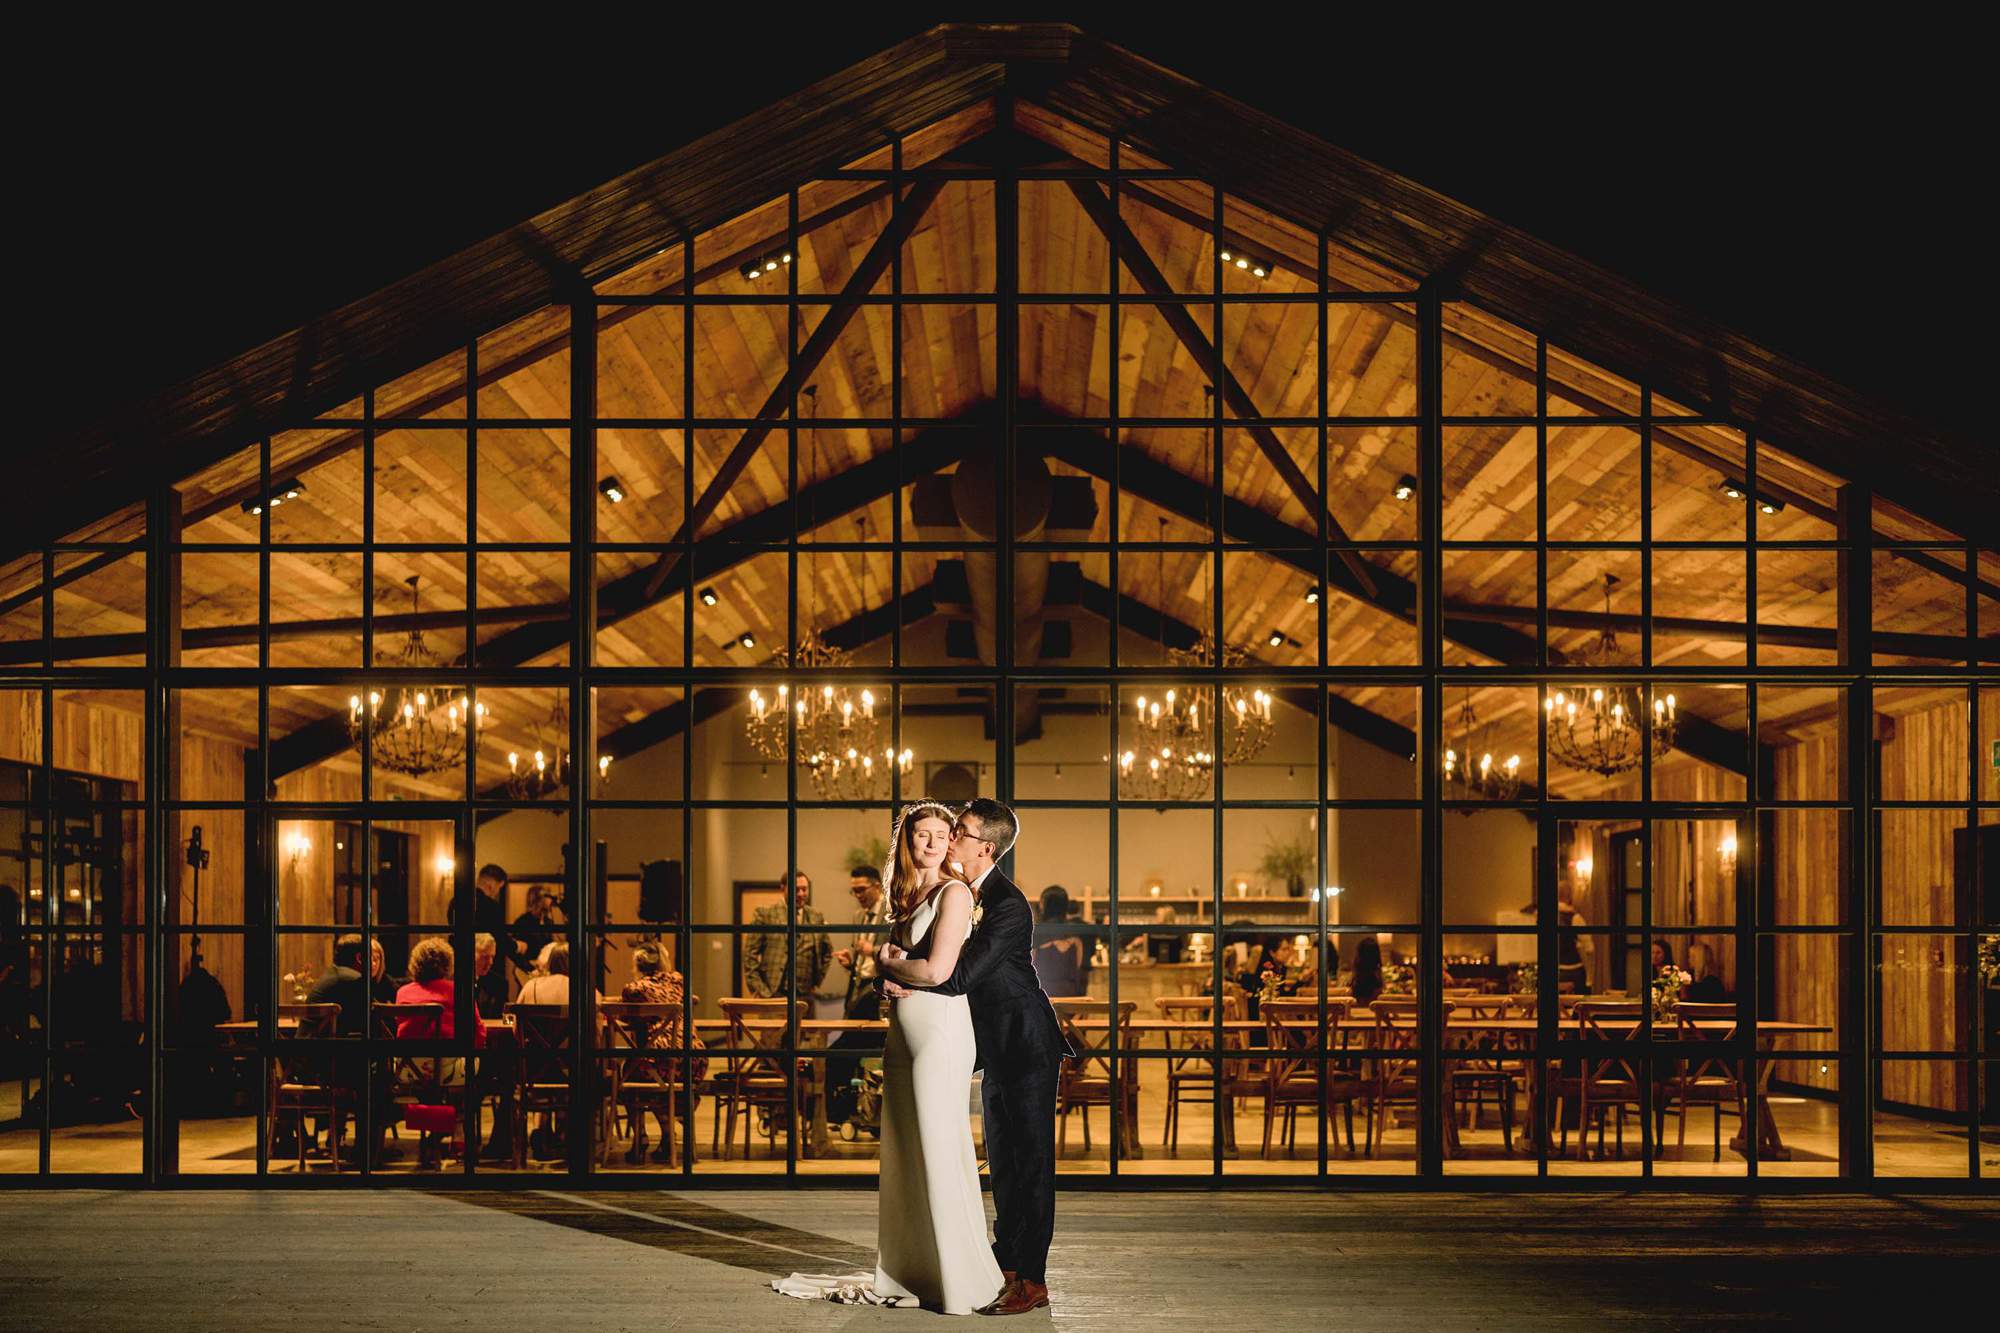 Bride and groom cuddle in front of the Barn at Botley Hill wedding venue in Surrey.